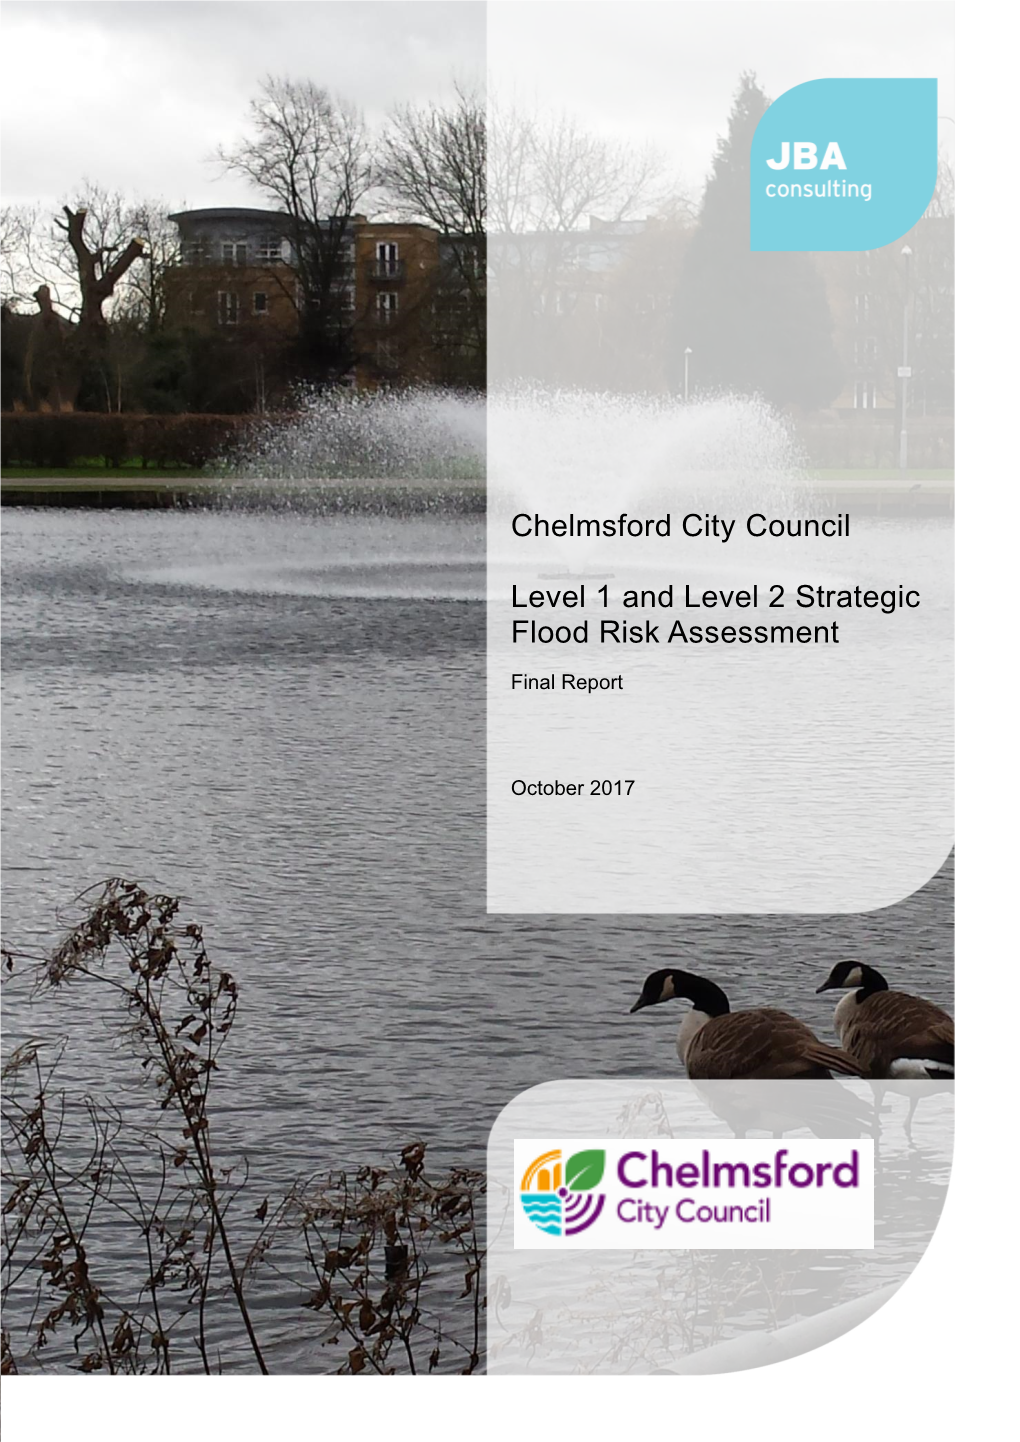 Chelmsford City Council Level 1 and Level 2 Strategic Flood Risk